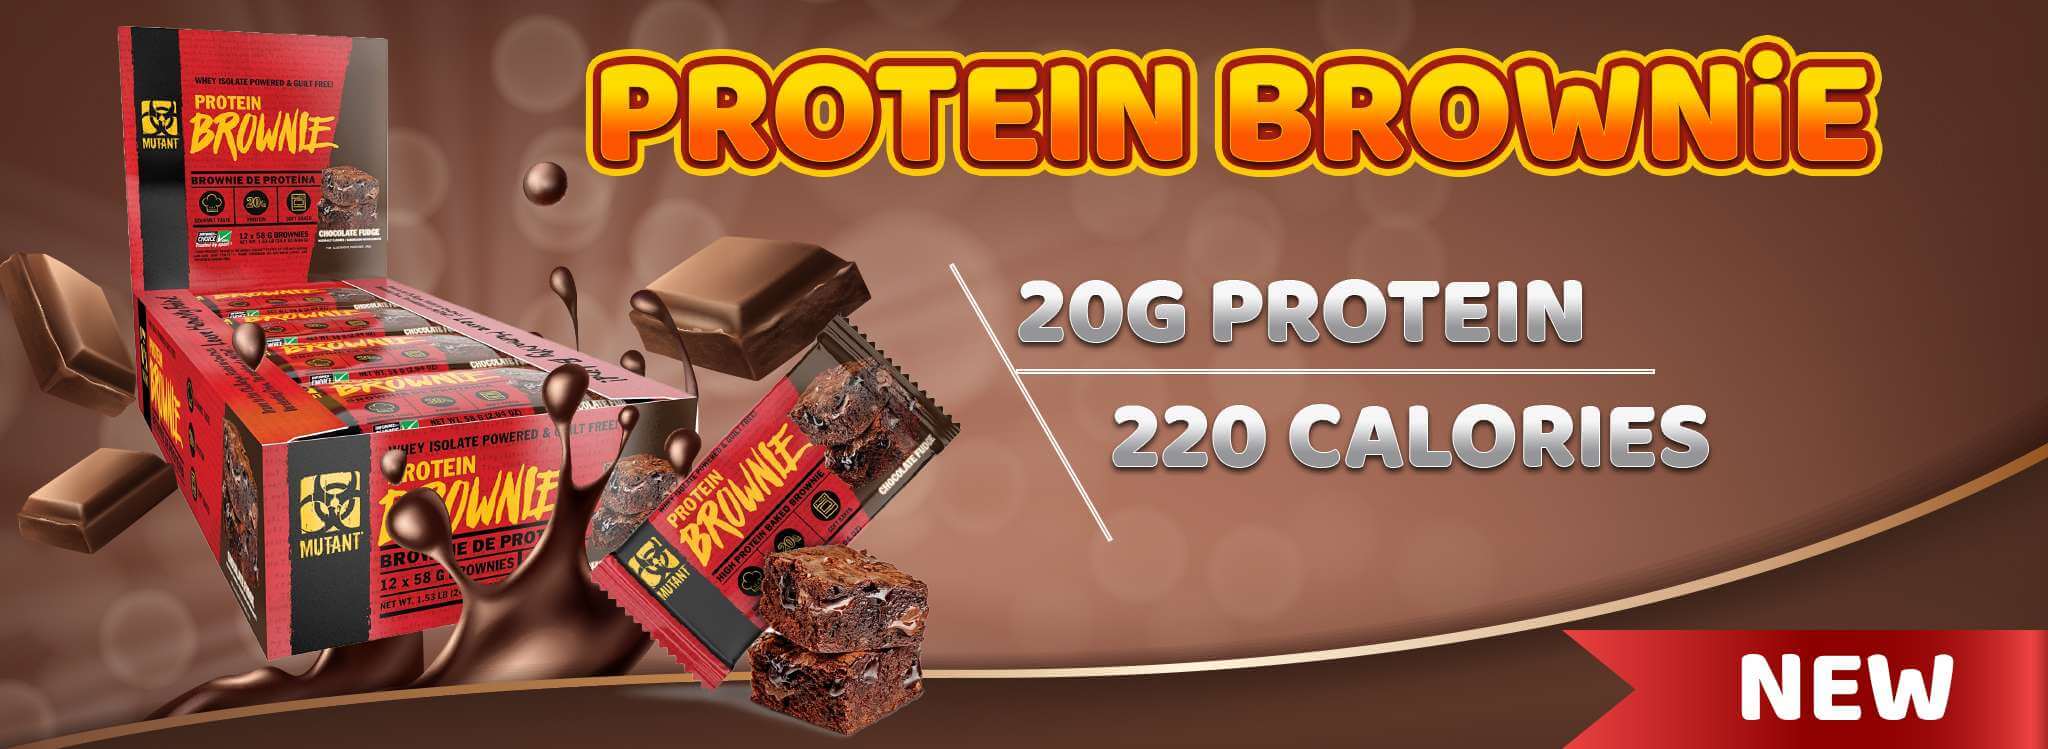 mutant-protein-bar-brownie-thanh-dinh-duong-nutrition-fact-gymstore